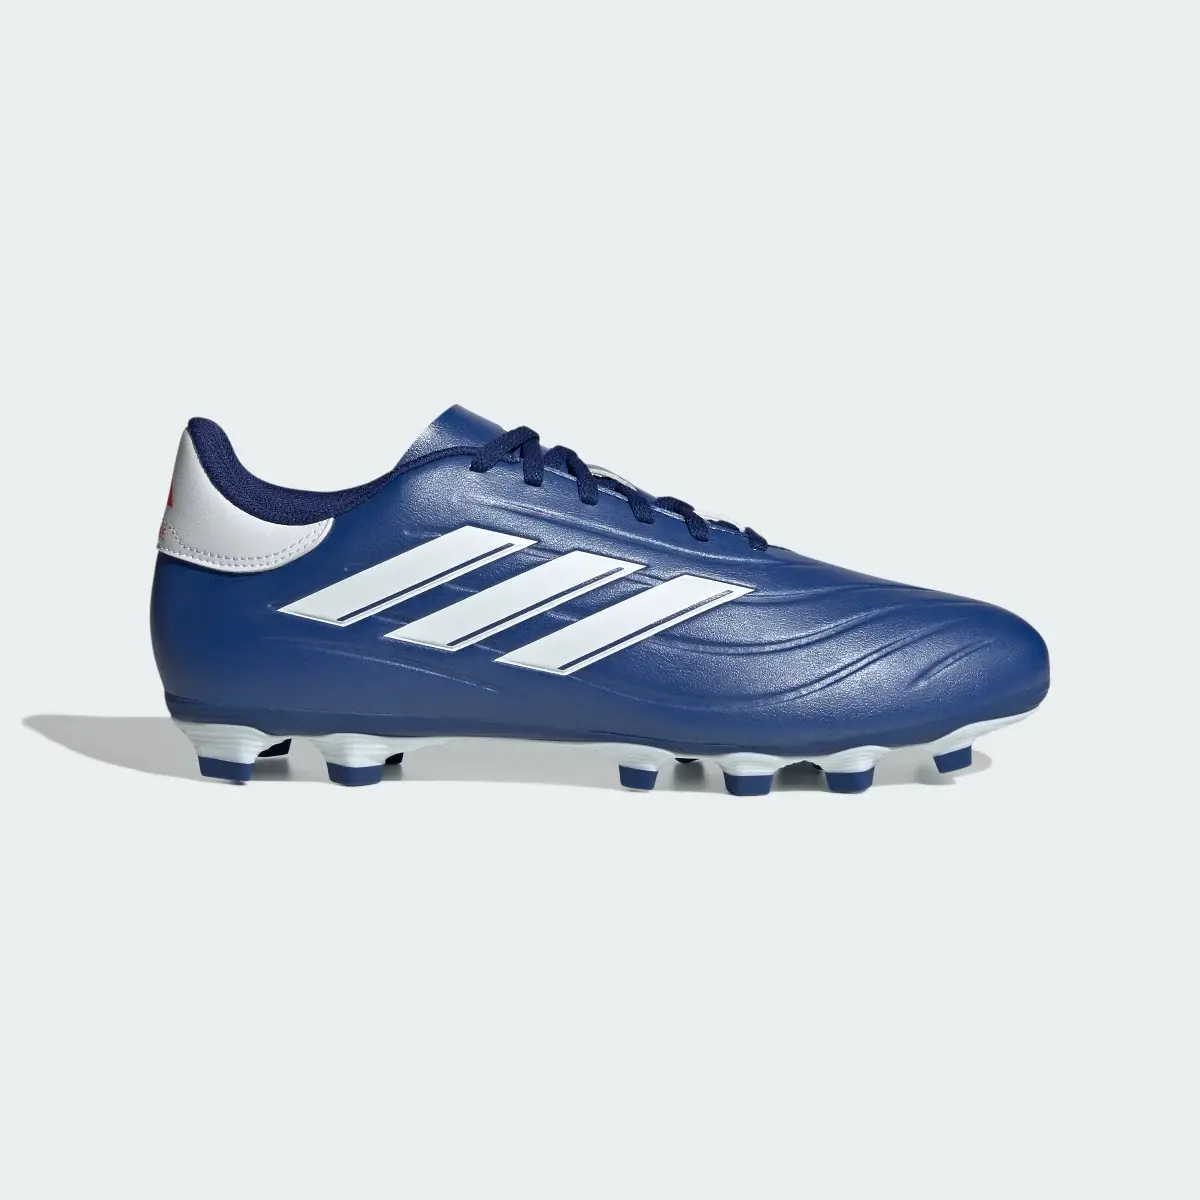 Adidas Copa Pure II.4 Flexible Ground Boots. 2